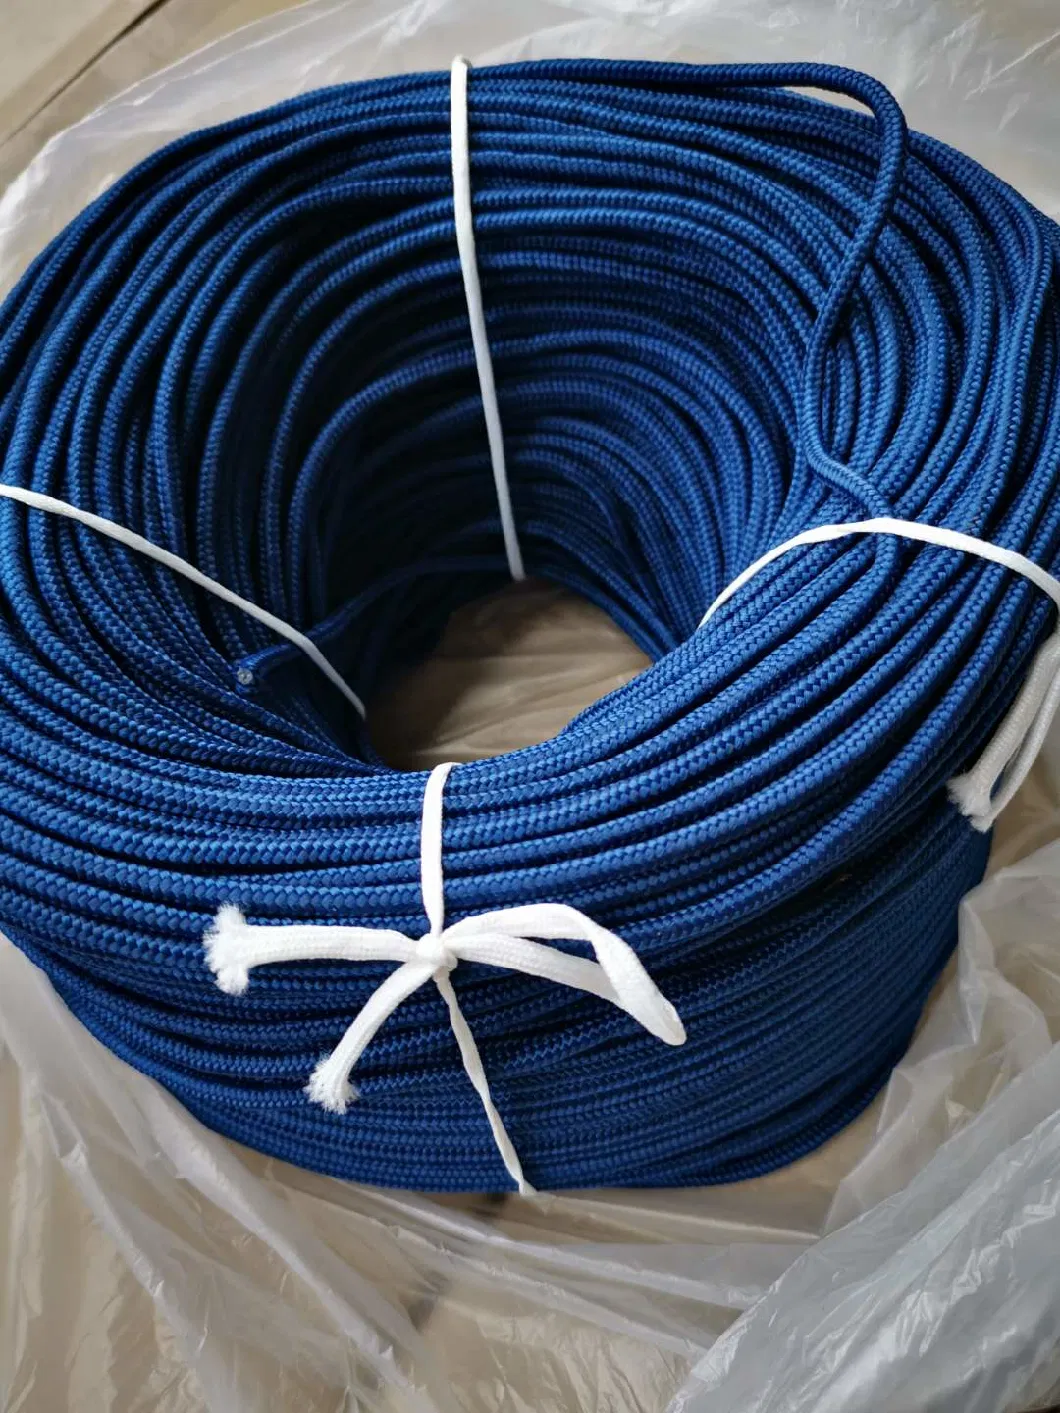 3/4 Strand Twisted/Braided PP/PE/Polyester/Nylon/Polypropylene Danline Beaded Lead/Lead Wire Core Lead Rope for Sinking Fishing Net